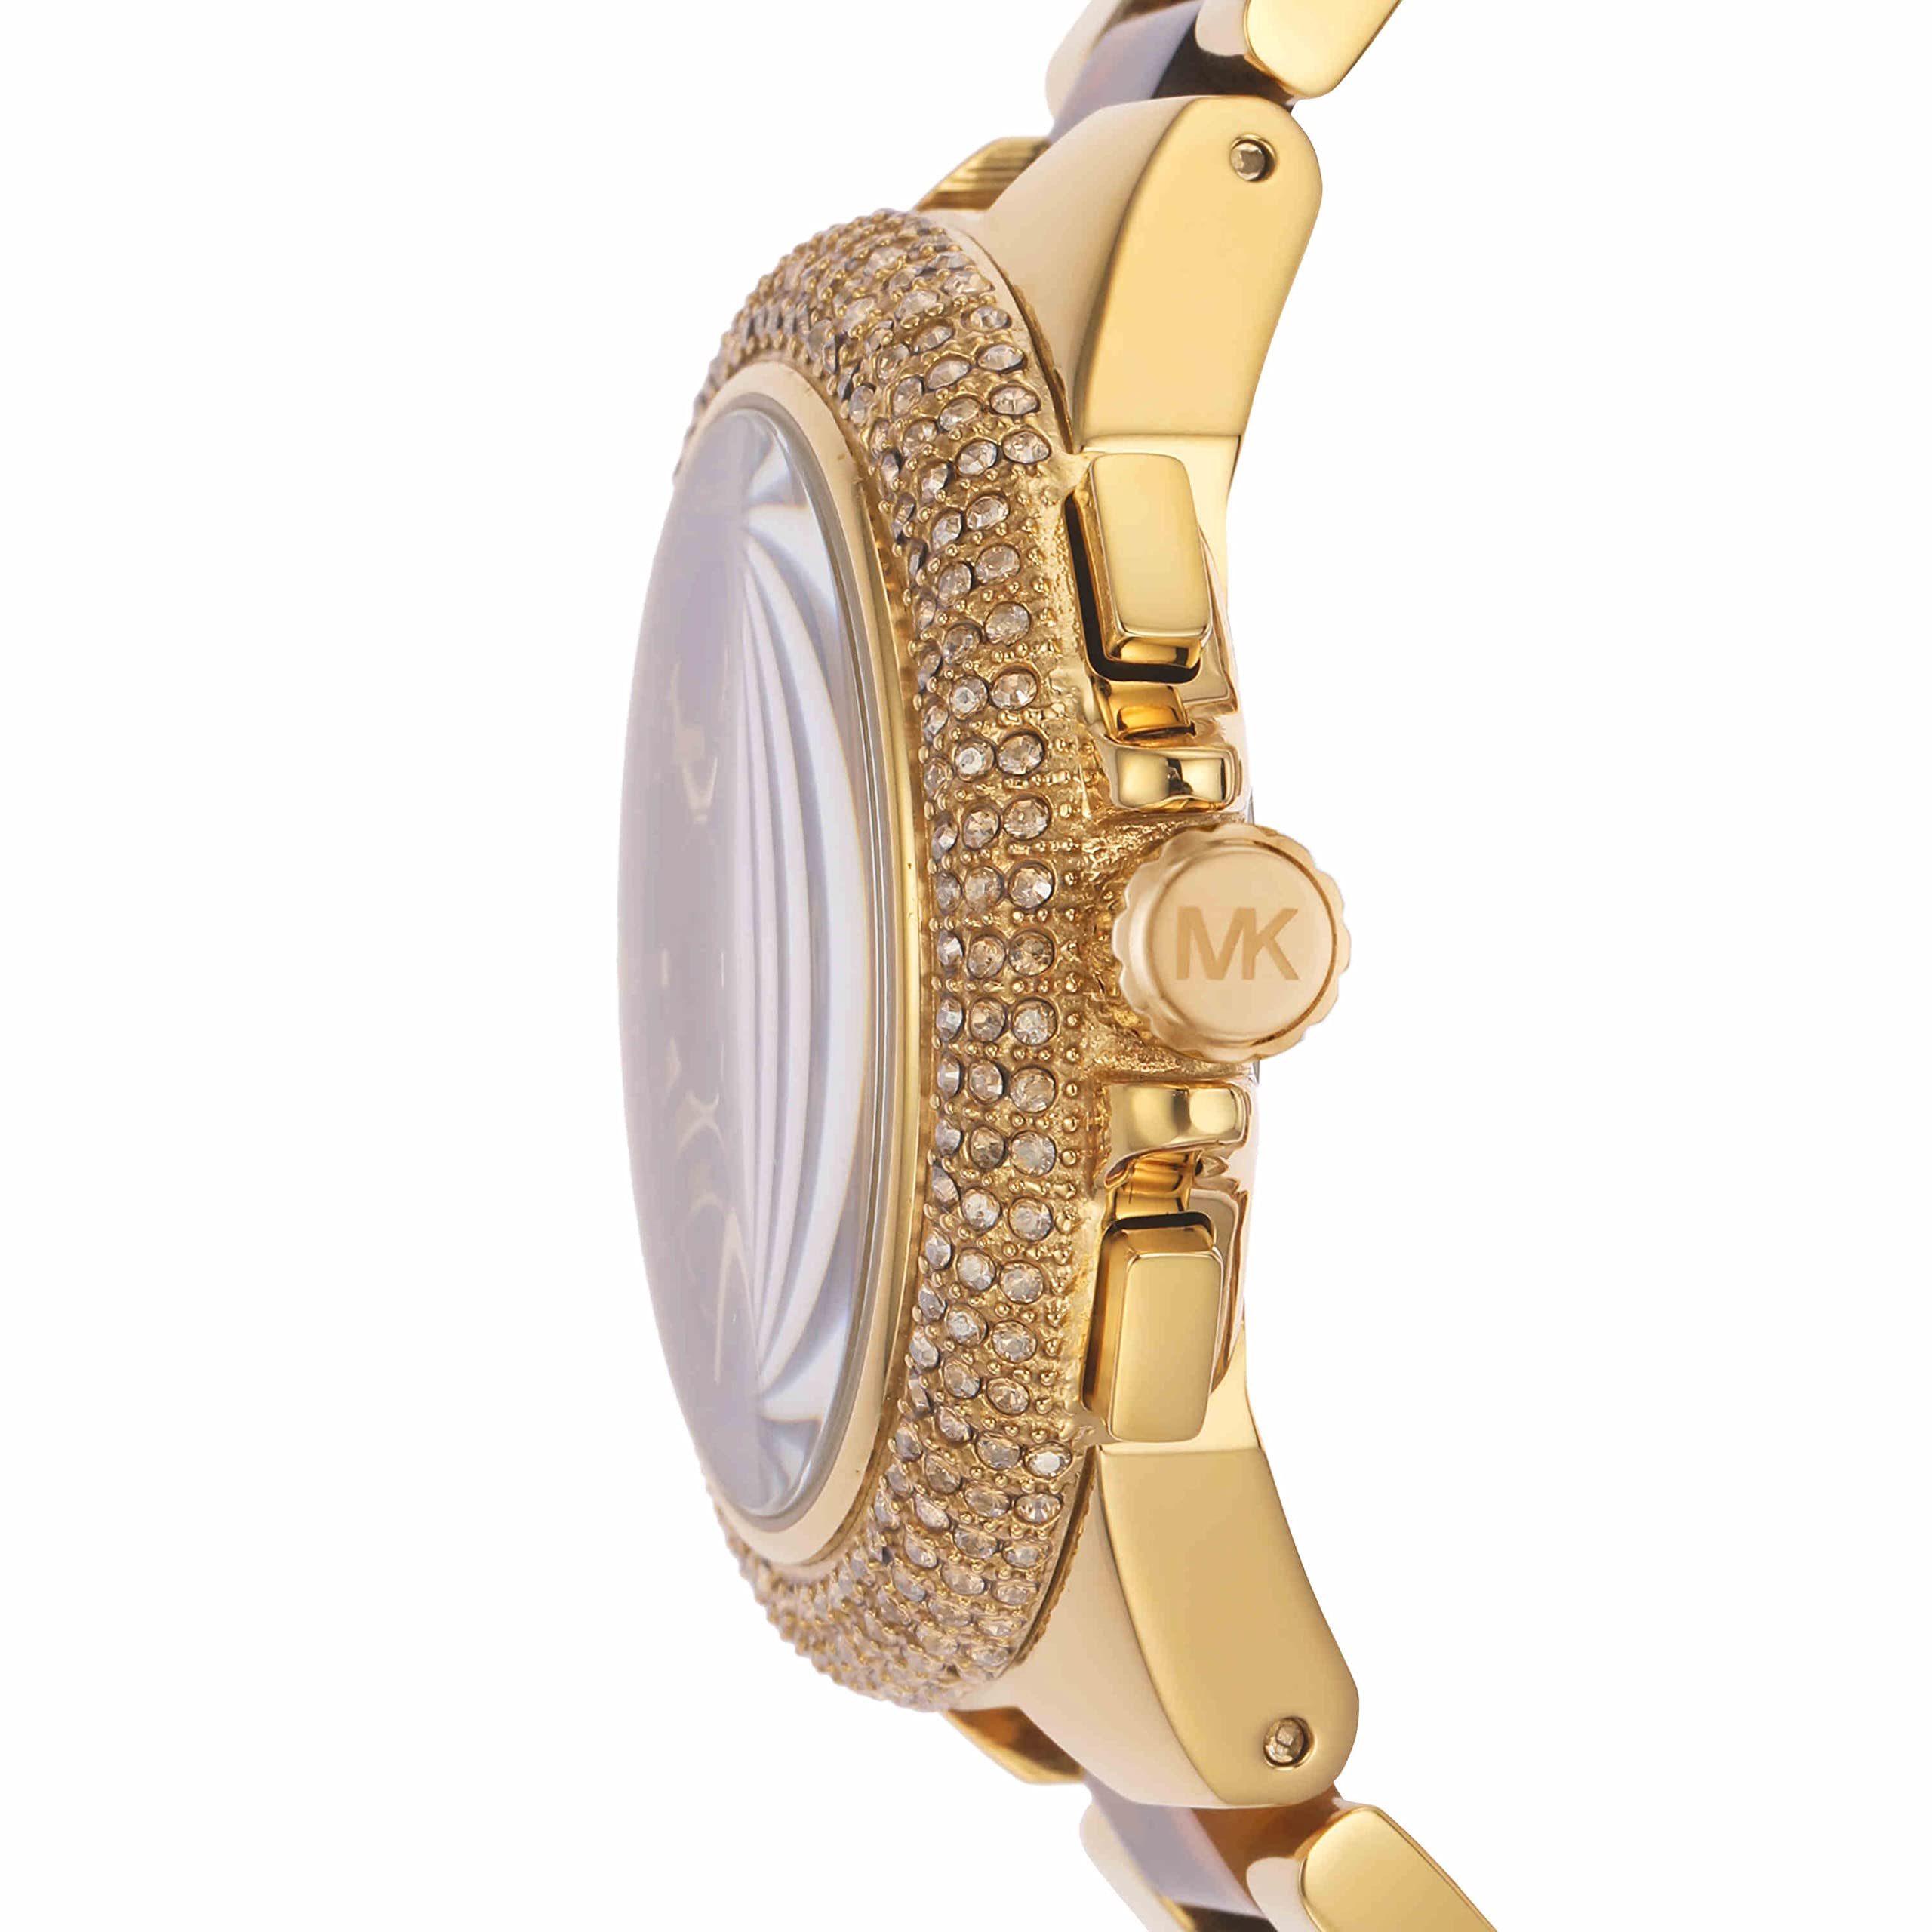 Michael Kors Camille Stainless Steel Multifunction Watch with Glitz Accents